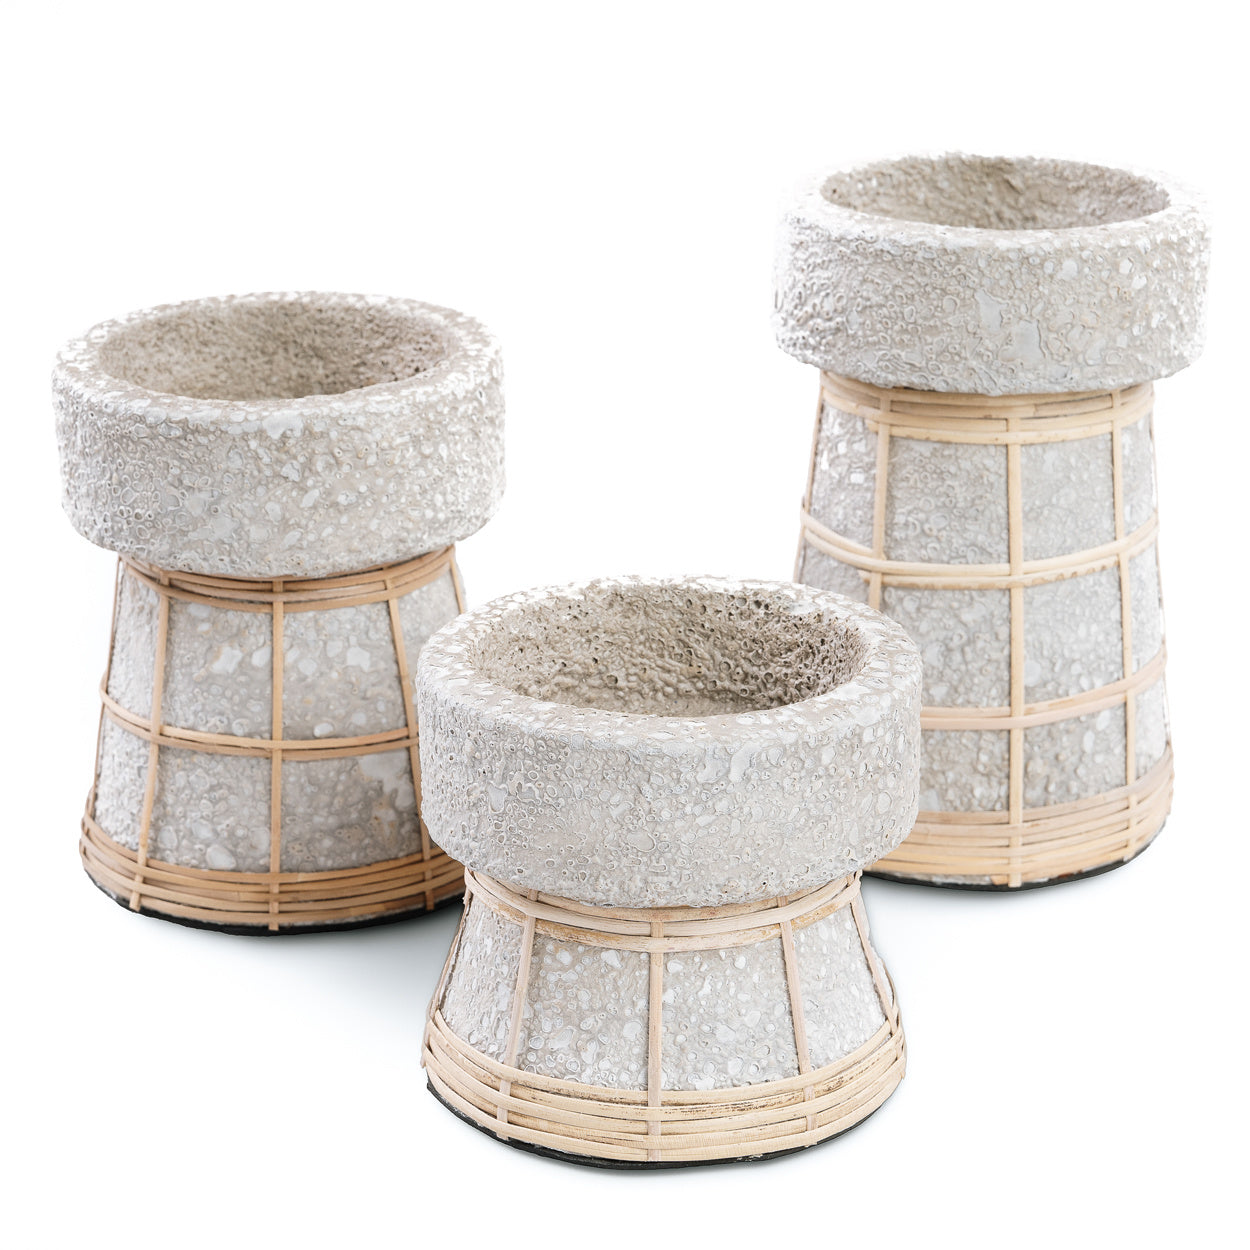 THE SERENE Candle Holder - Concrete Natural